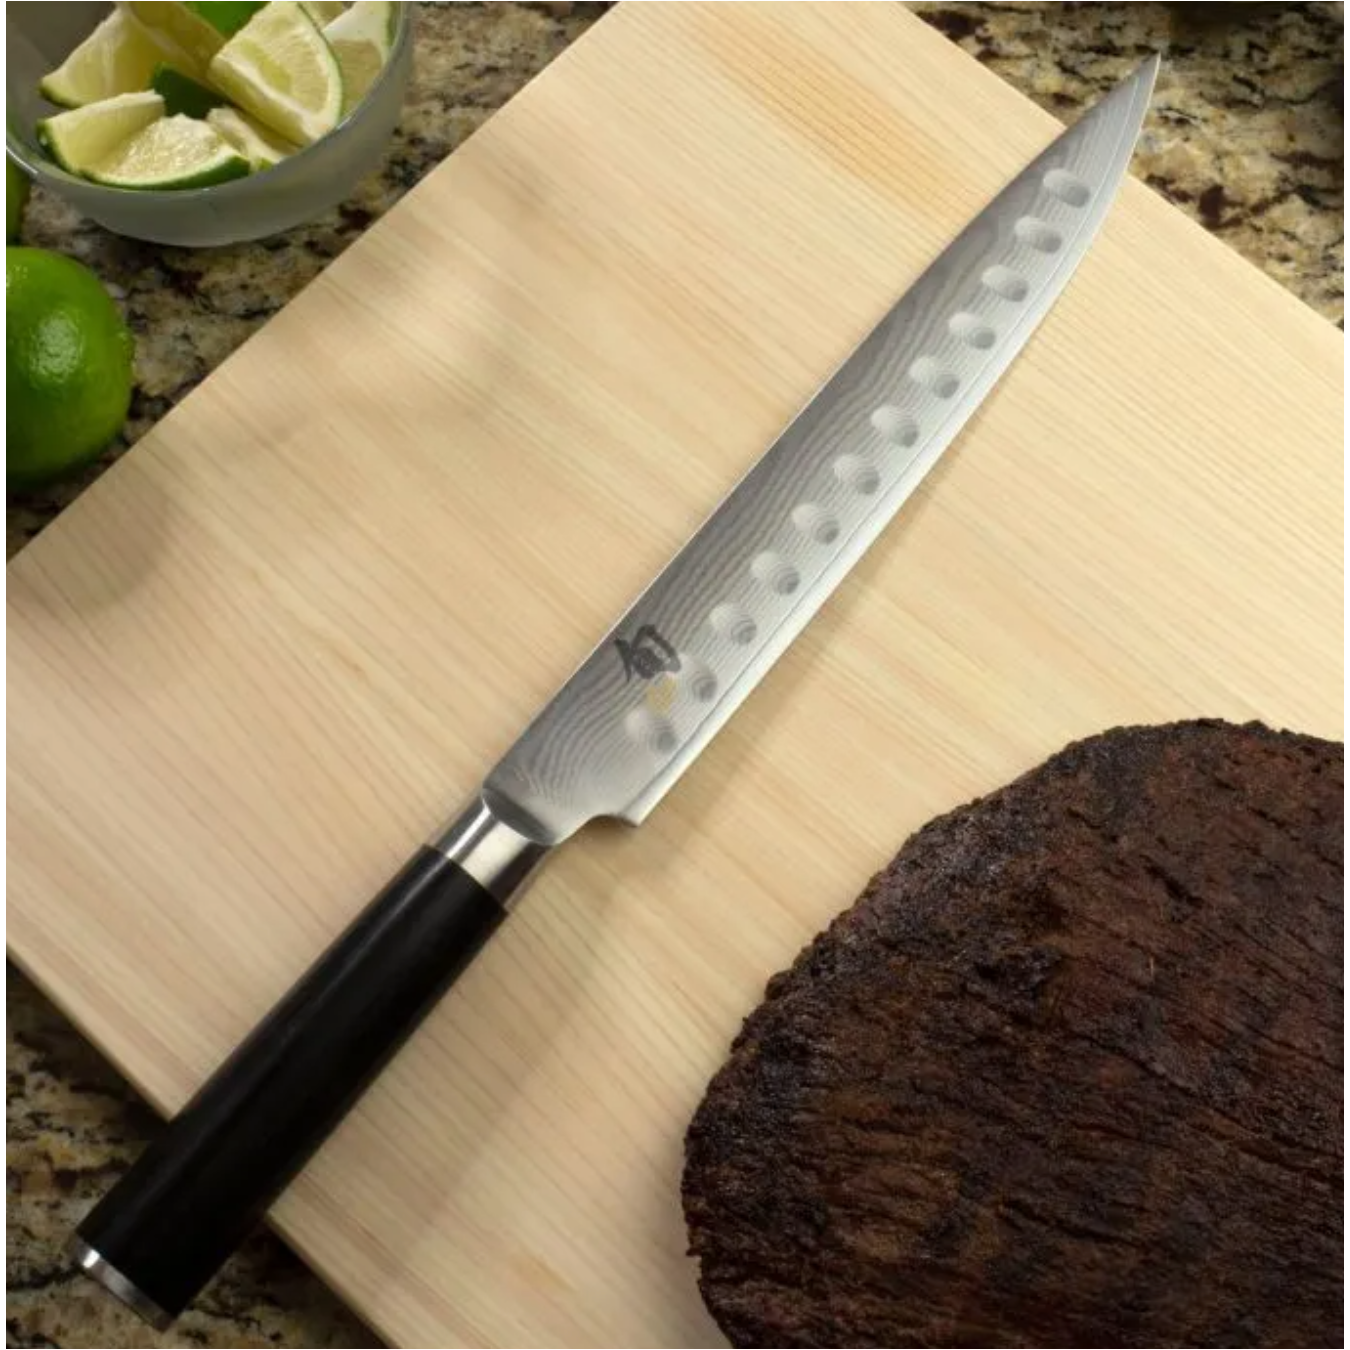 Classic Scalloped Slicing Knife - 9"